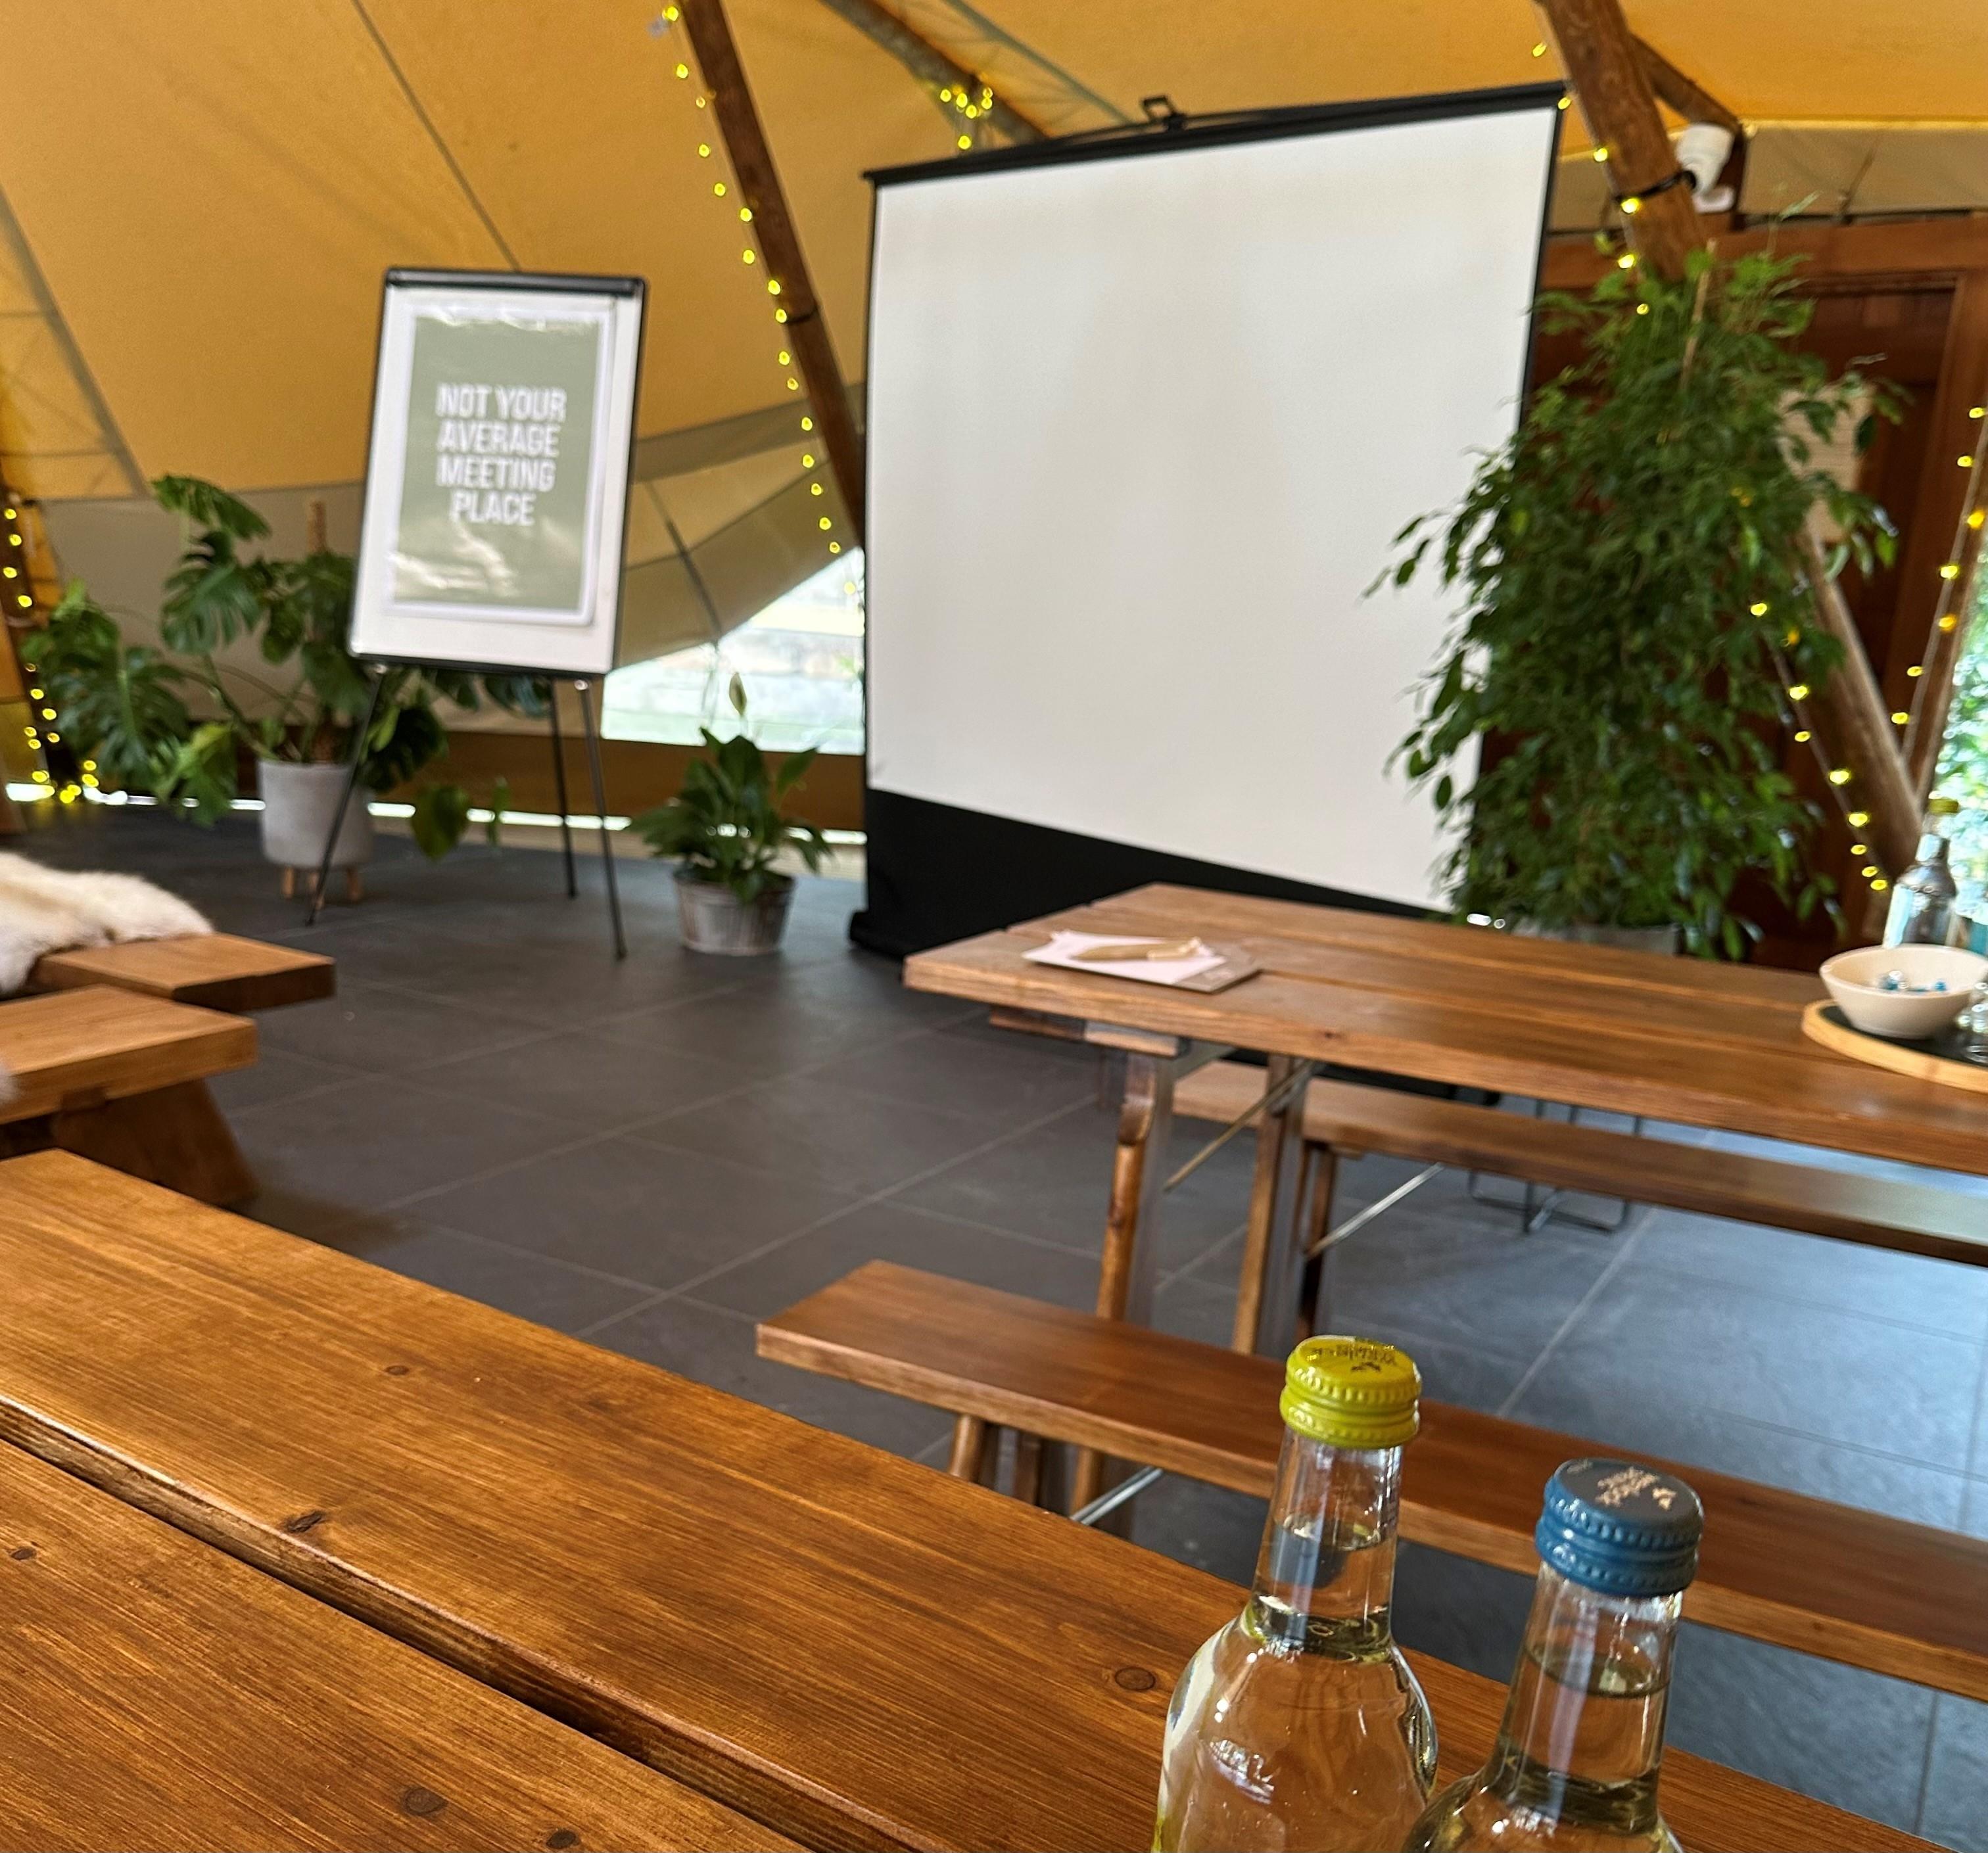 The Woodlands At Hothorpe Hall, Woodlands Tipi & Outdoor Kitchen photo #3